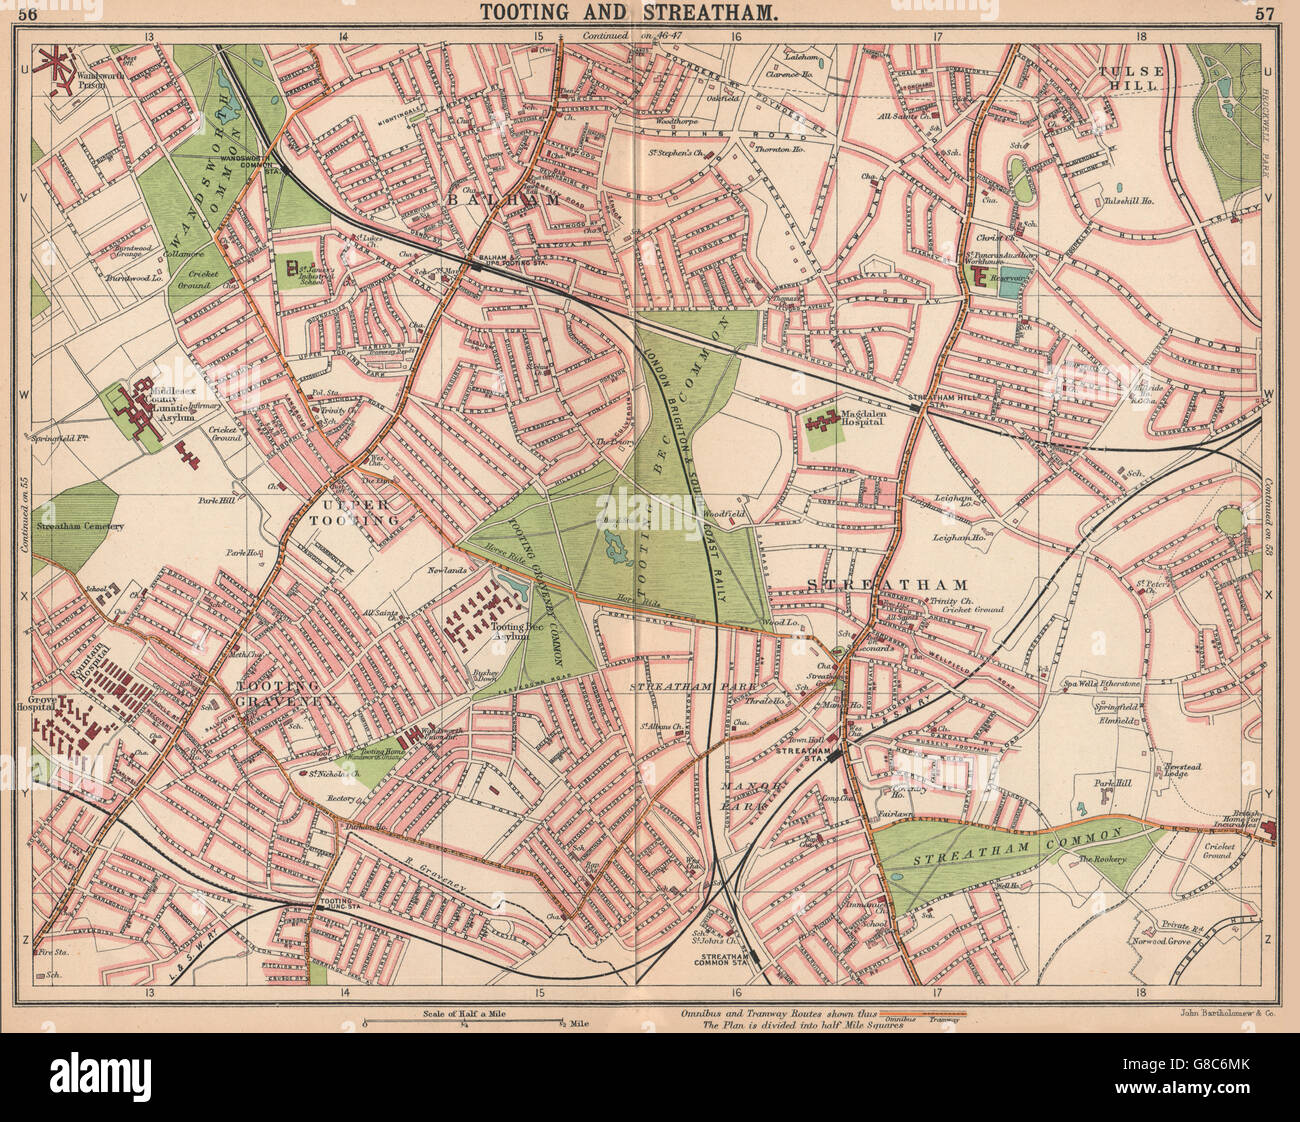 LONDON S: Tooting Streatham Balham Tulse Hill. Bus & tram routes, 1913 old map Stock Photo